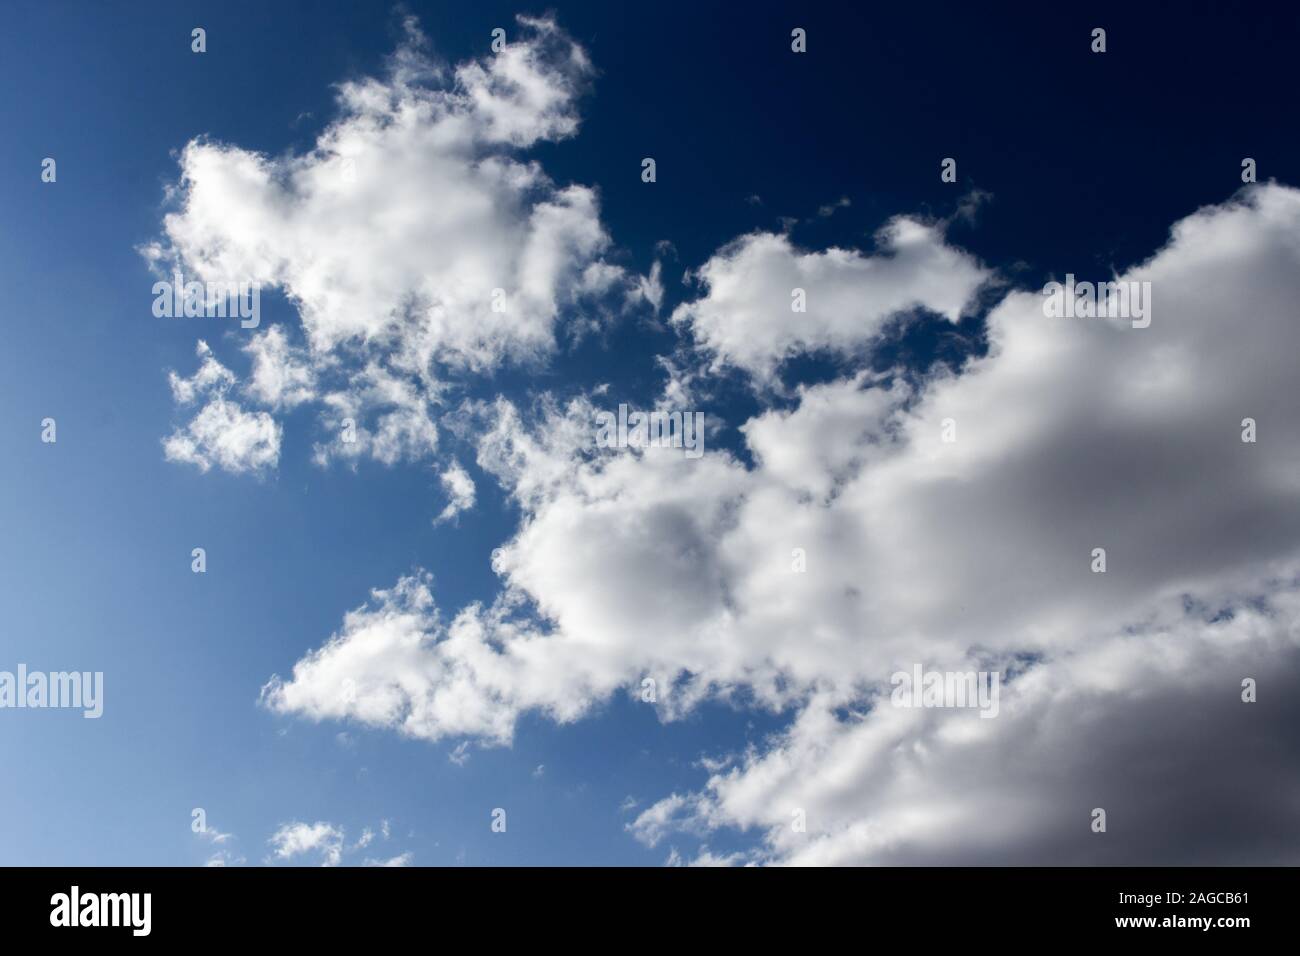 Dark Evening Sky With White Clouds Twilight Blue Sky With Puffy Cumulus Clouds Heavenly Landscape Background Wallpaper Backdrop Texture Empty Sky Stock Photo Alamy